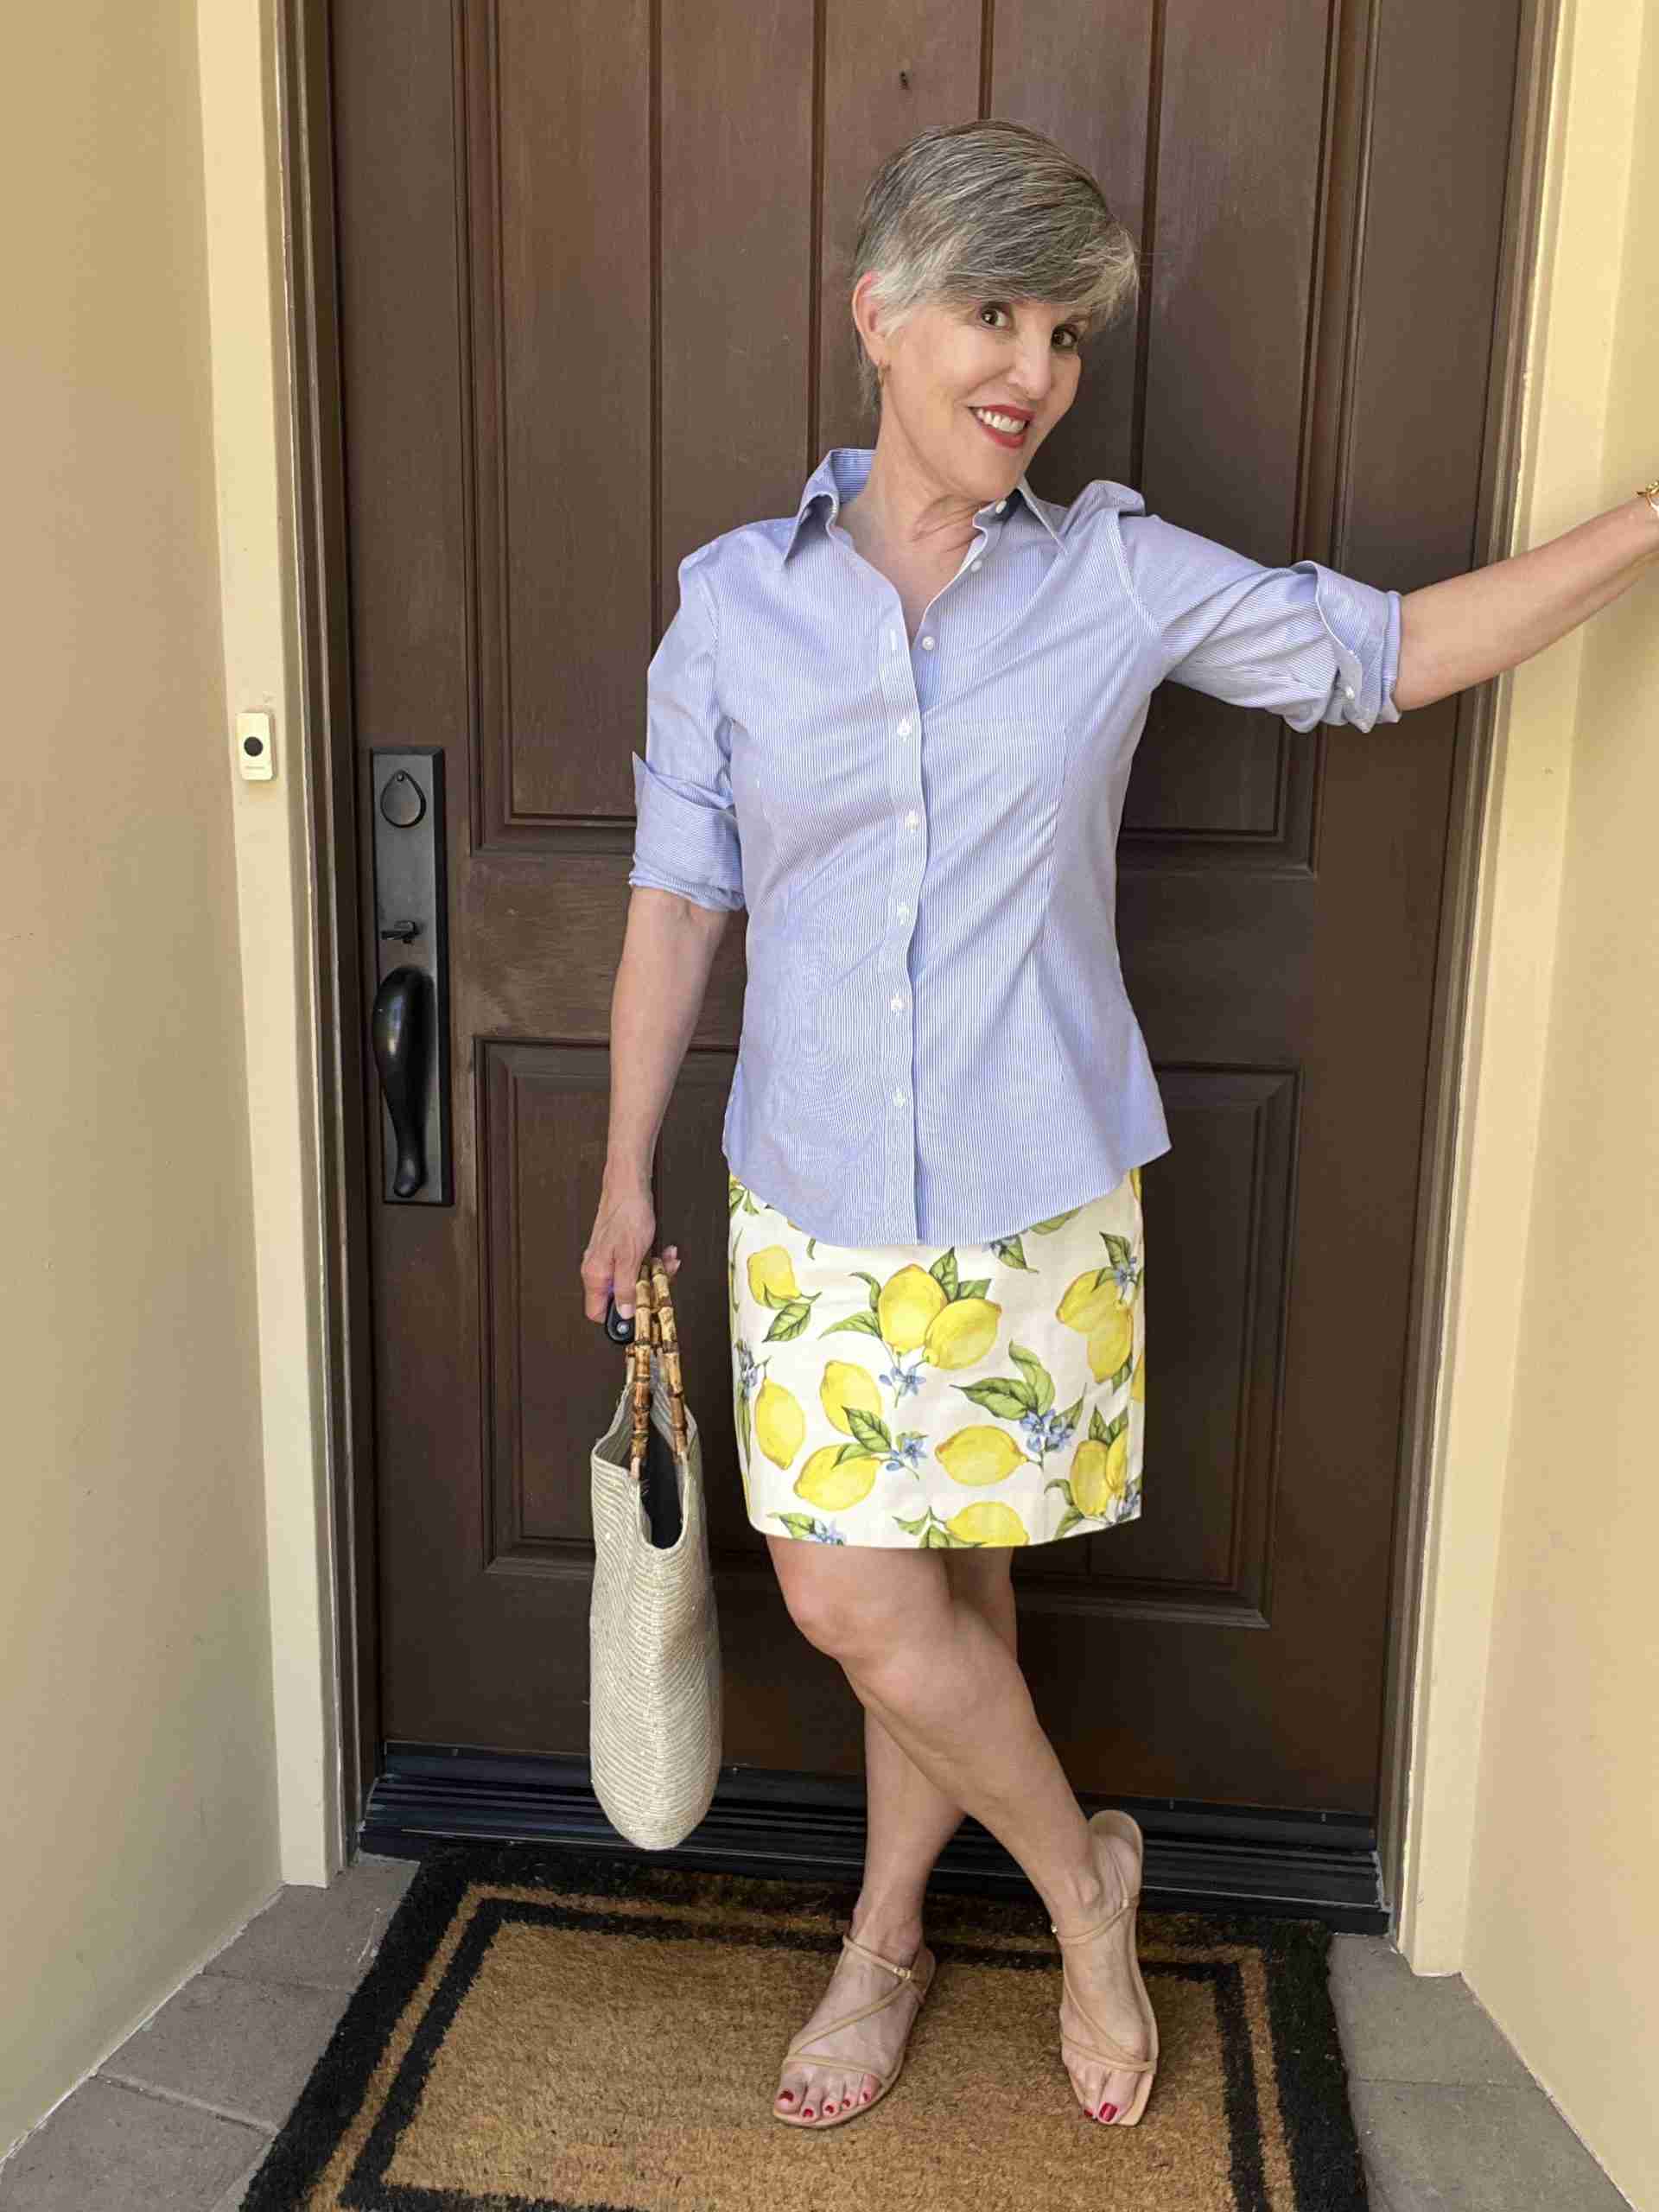 Here, I paired a lemon print skirt with a blue pinstriped shirt.  These stripes are subtle and coordinate with the blue in the skirt.  Pro-tip: A number of my readers are reluctant to wear horizontal stripes as they feel they can look wider in them.  These vertical stripes are universally flattering as they make everyone look taller and more slender.